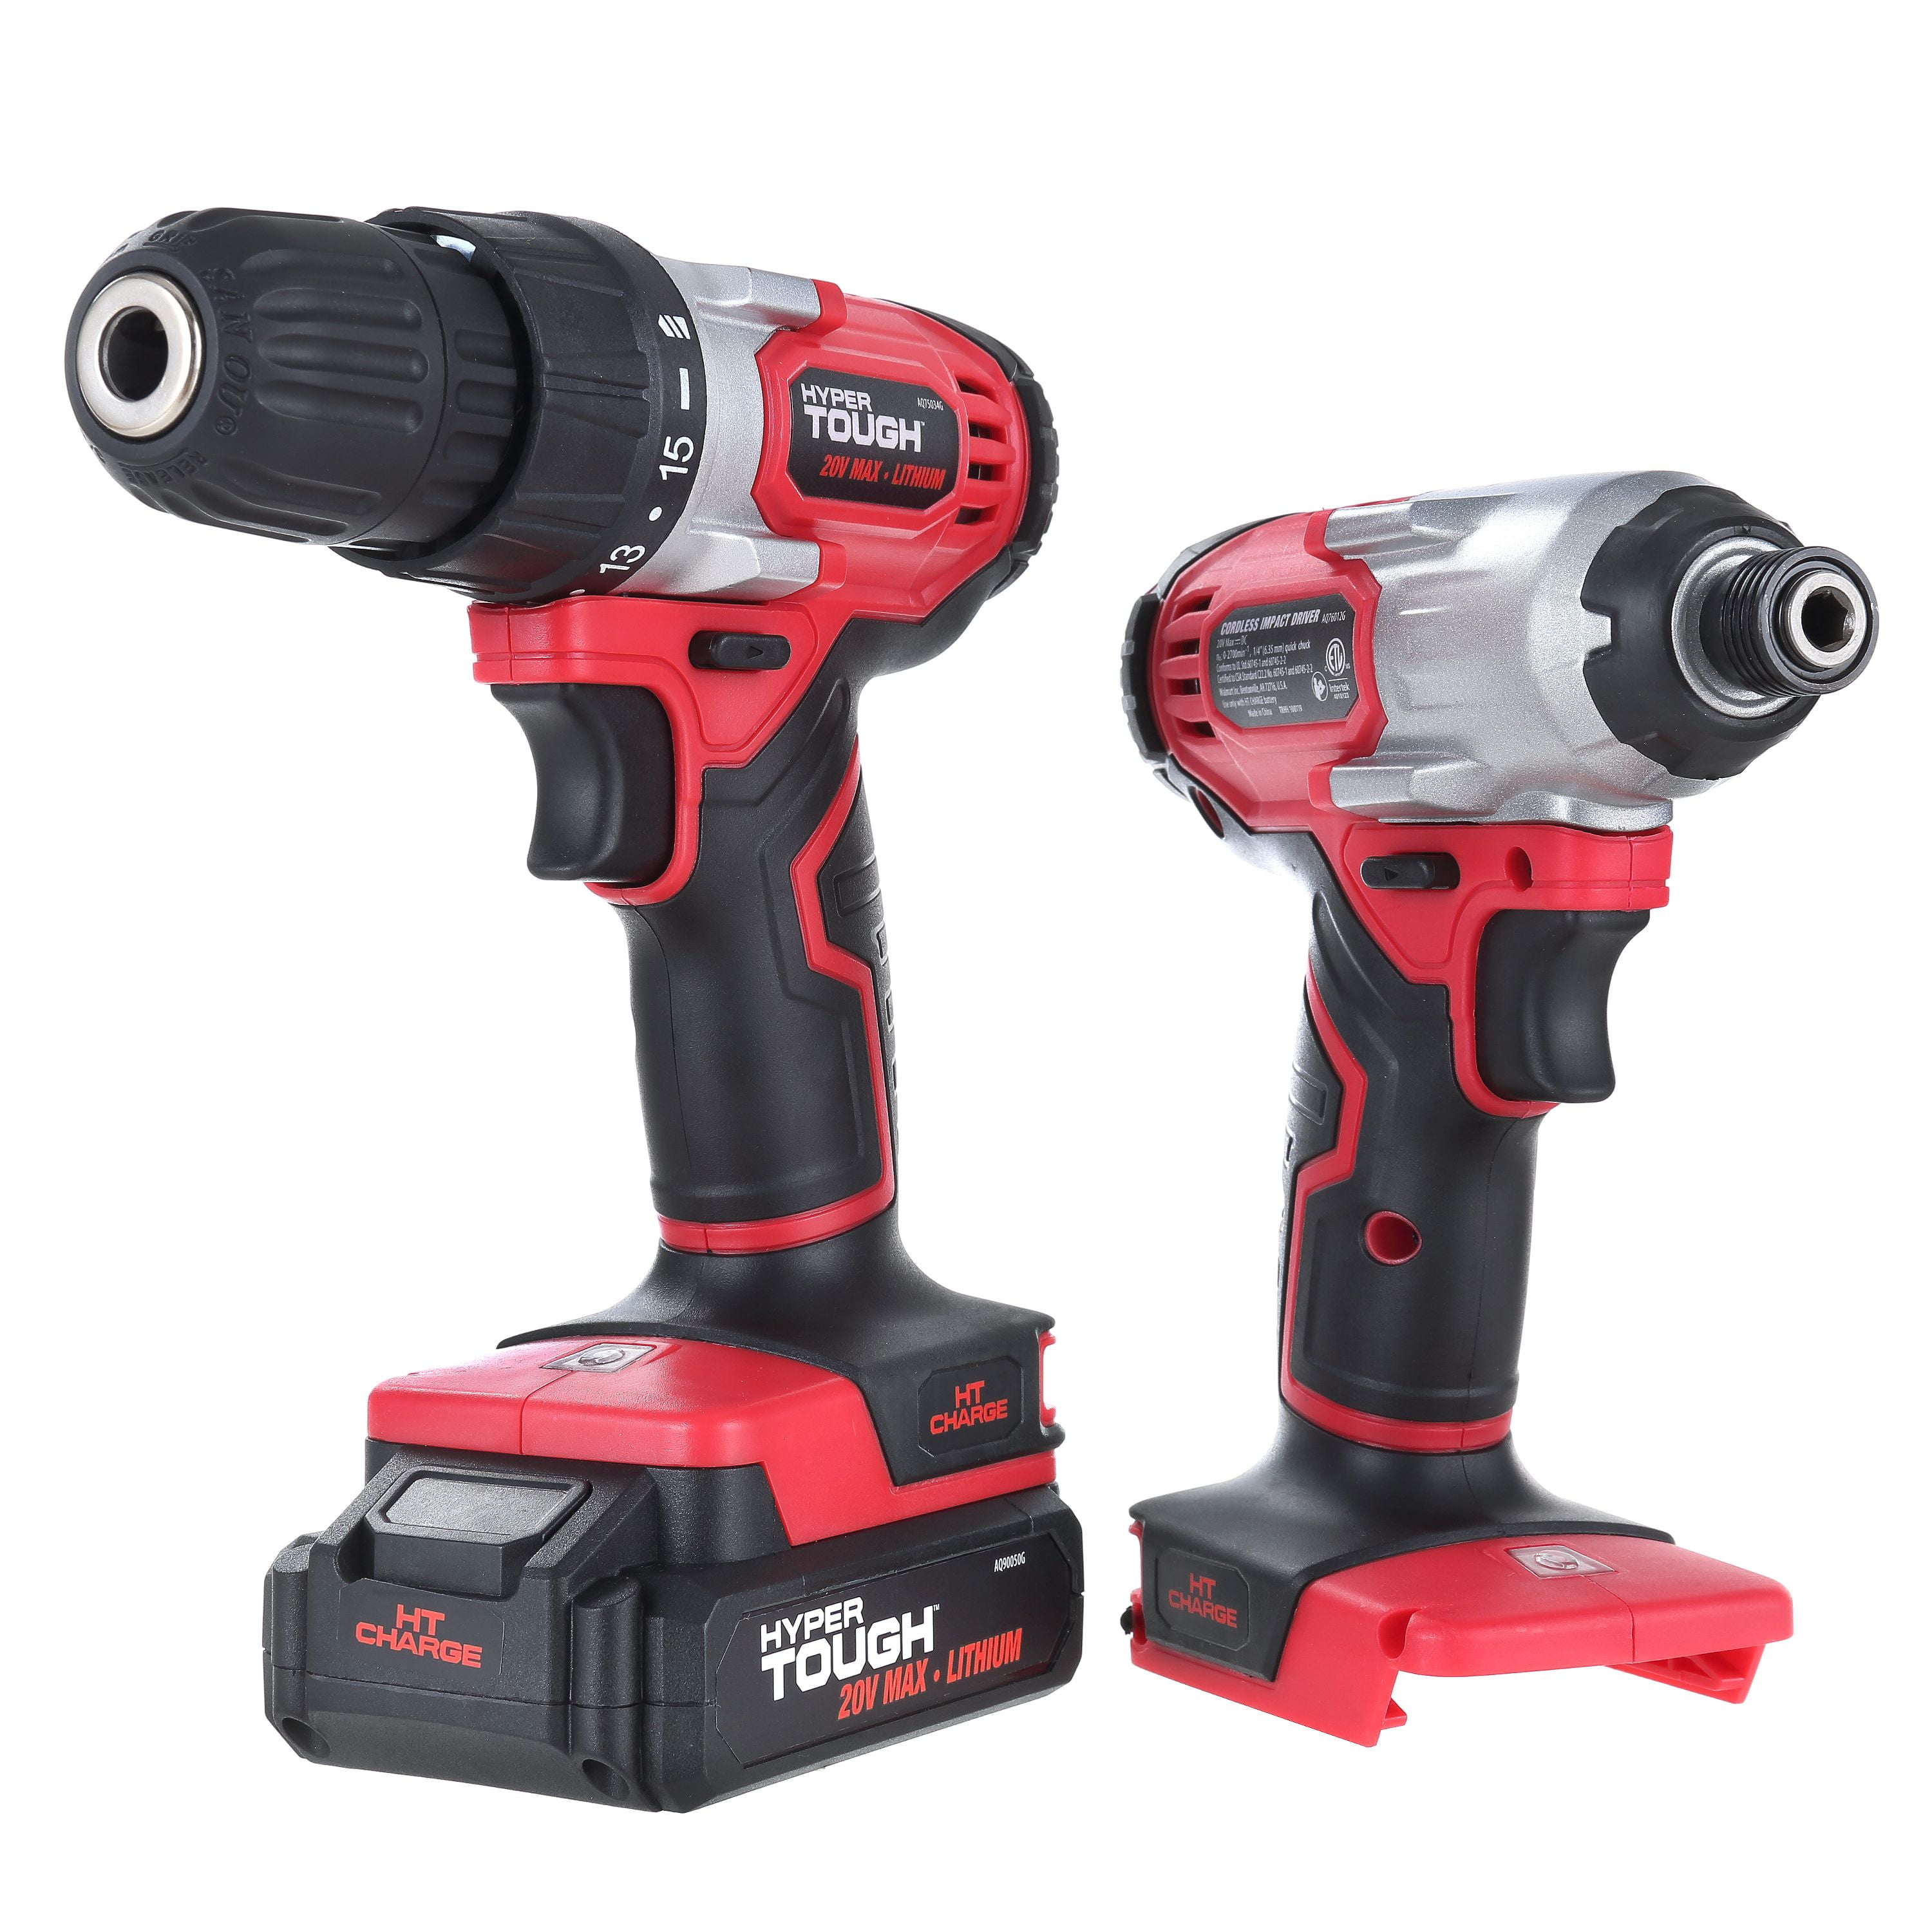 Hyper Tough 20V Max Lithium-ion 3/8 inch Cordless Drill  1/4 inch Impact  Driver Combo Kit (2-Tool Set) with 1.5Ah Lithium-ion Battery, Charger, Bit  Holders  LED Lights